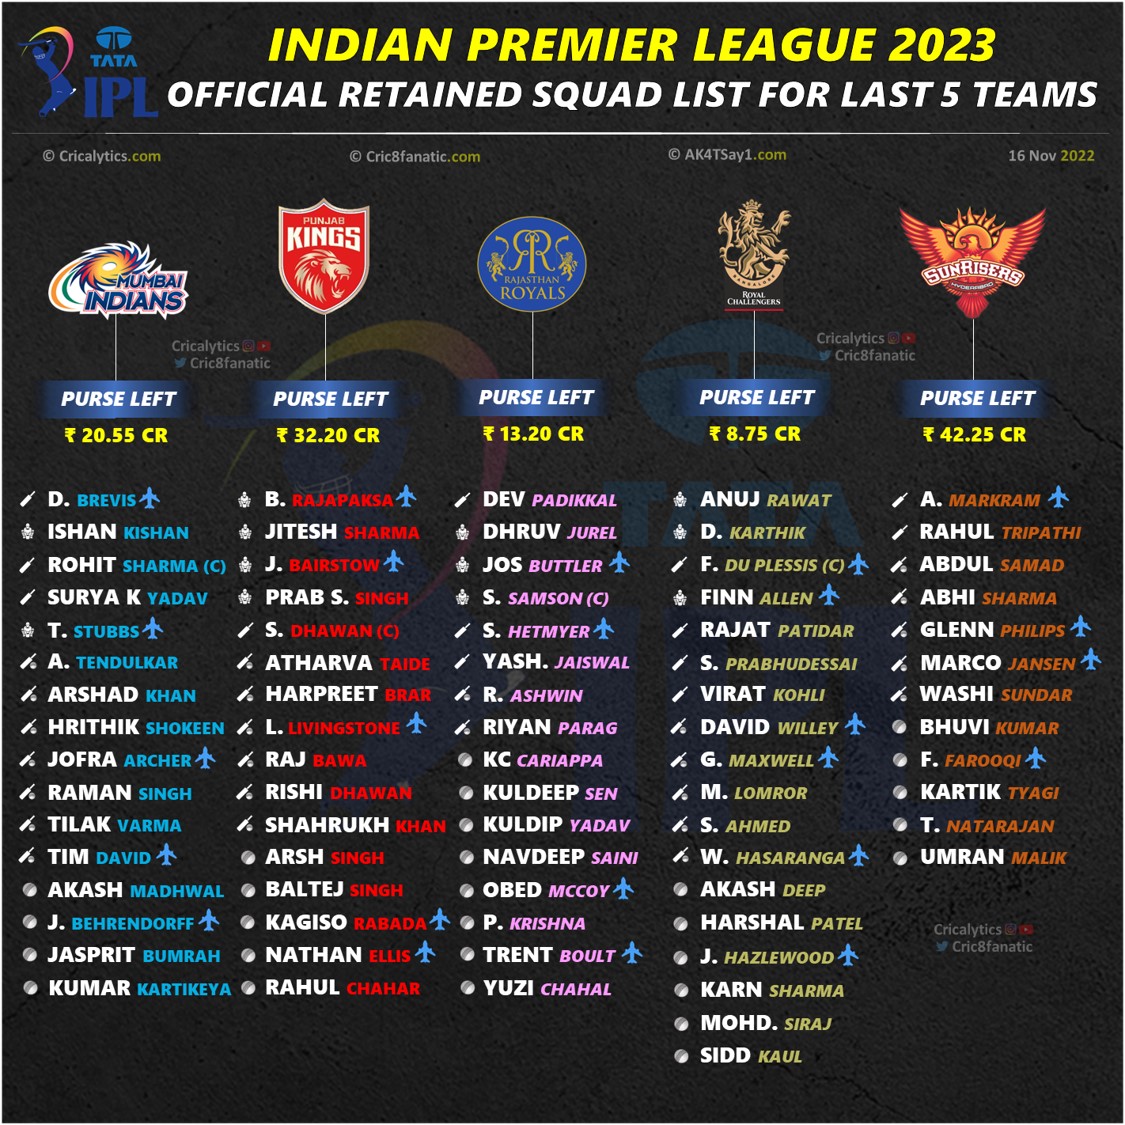 IPL 2023 All 10 Teams Full Retained Squad Players List and Purse Left